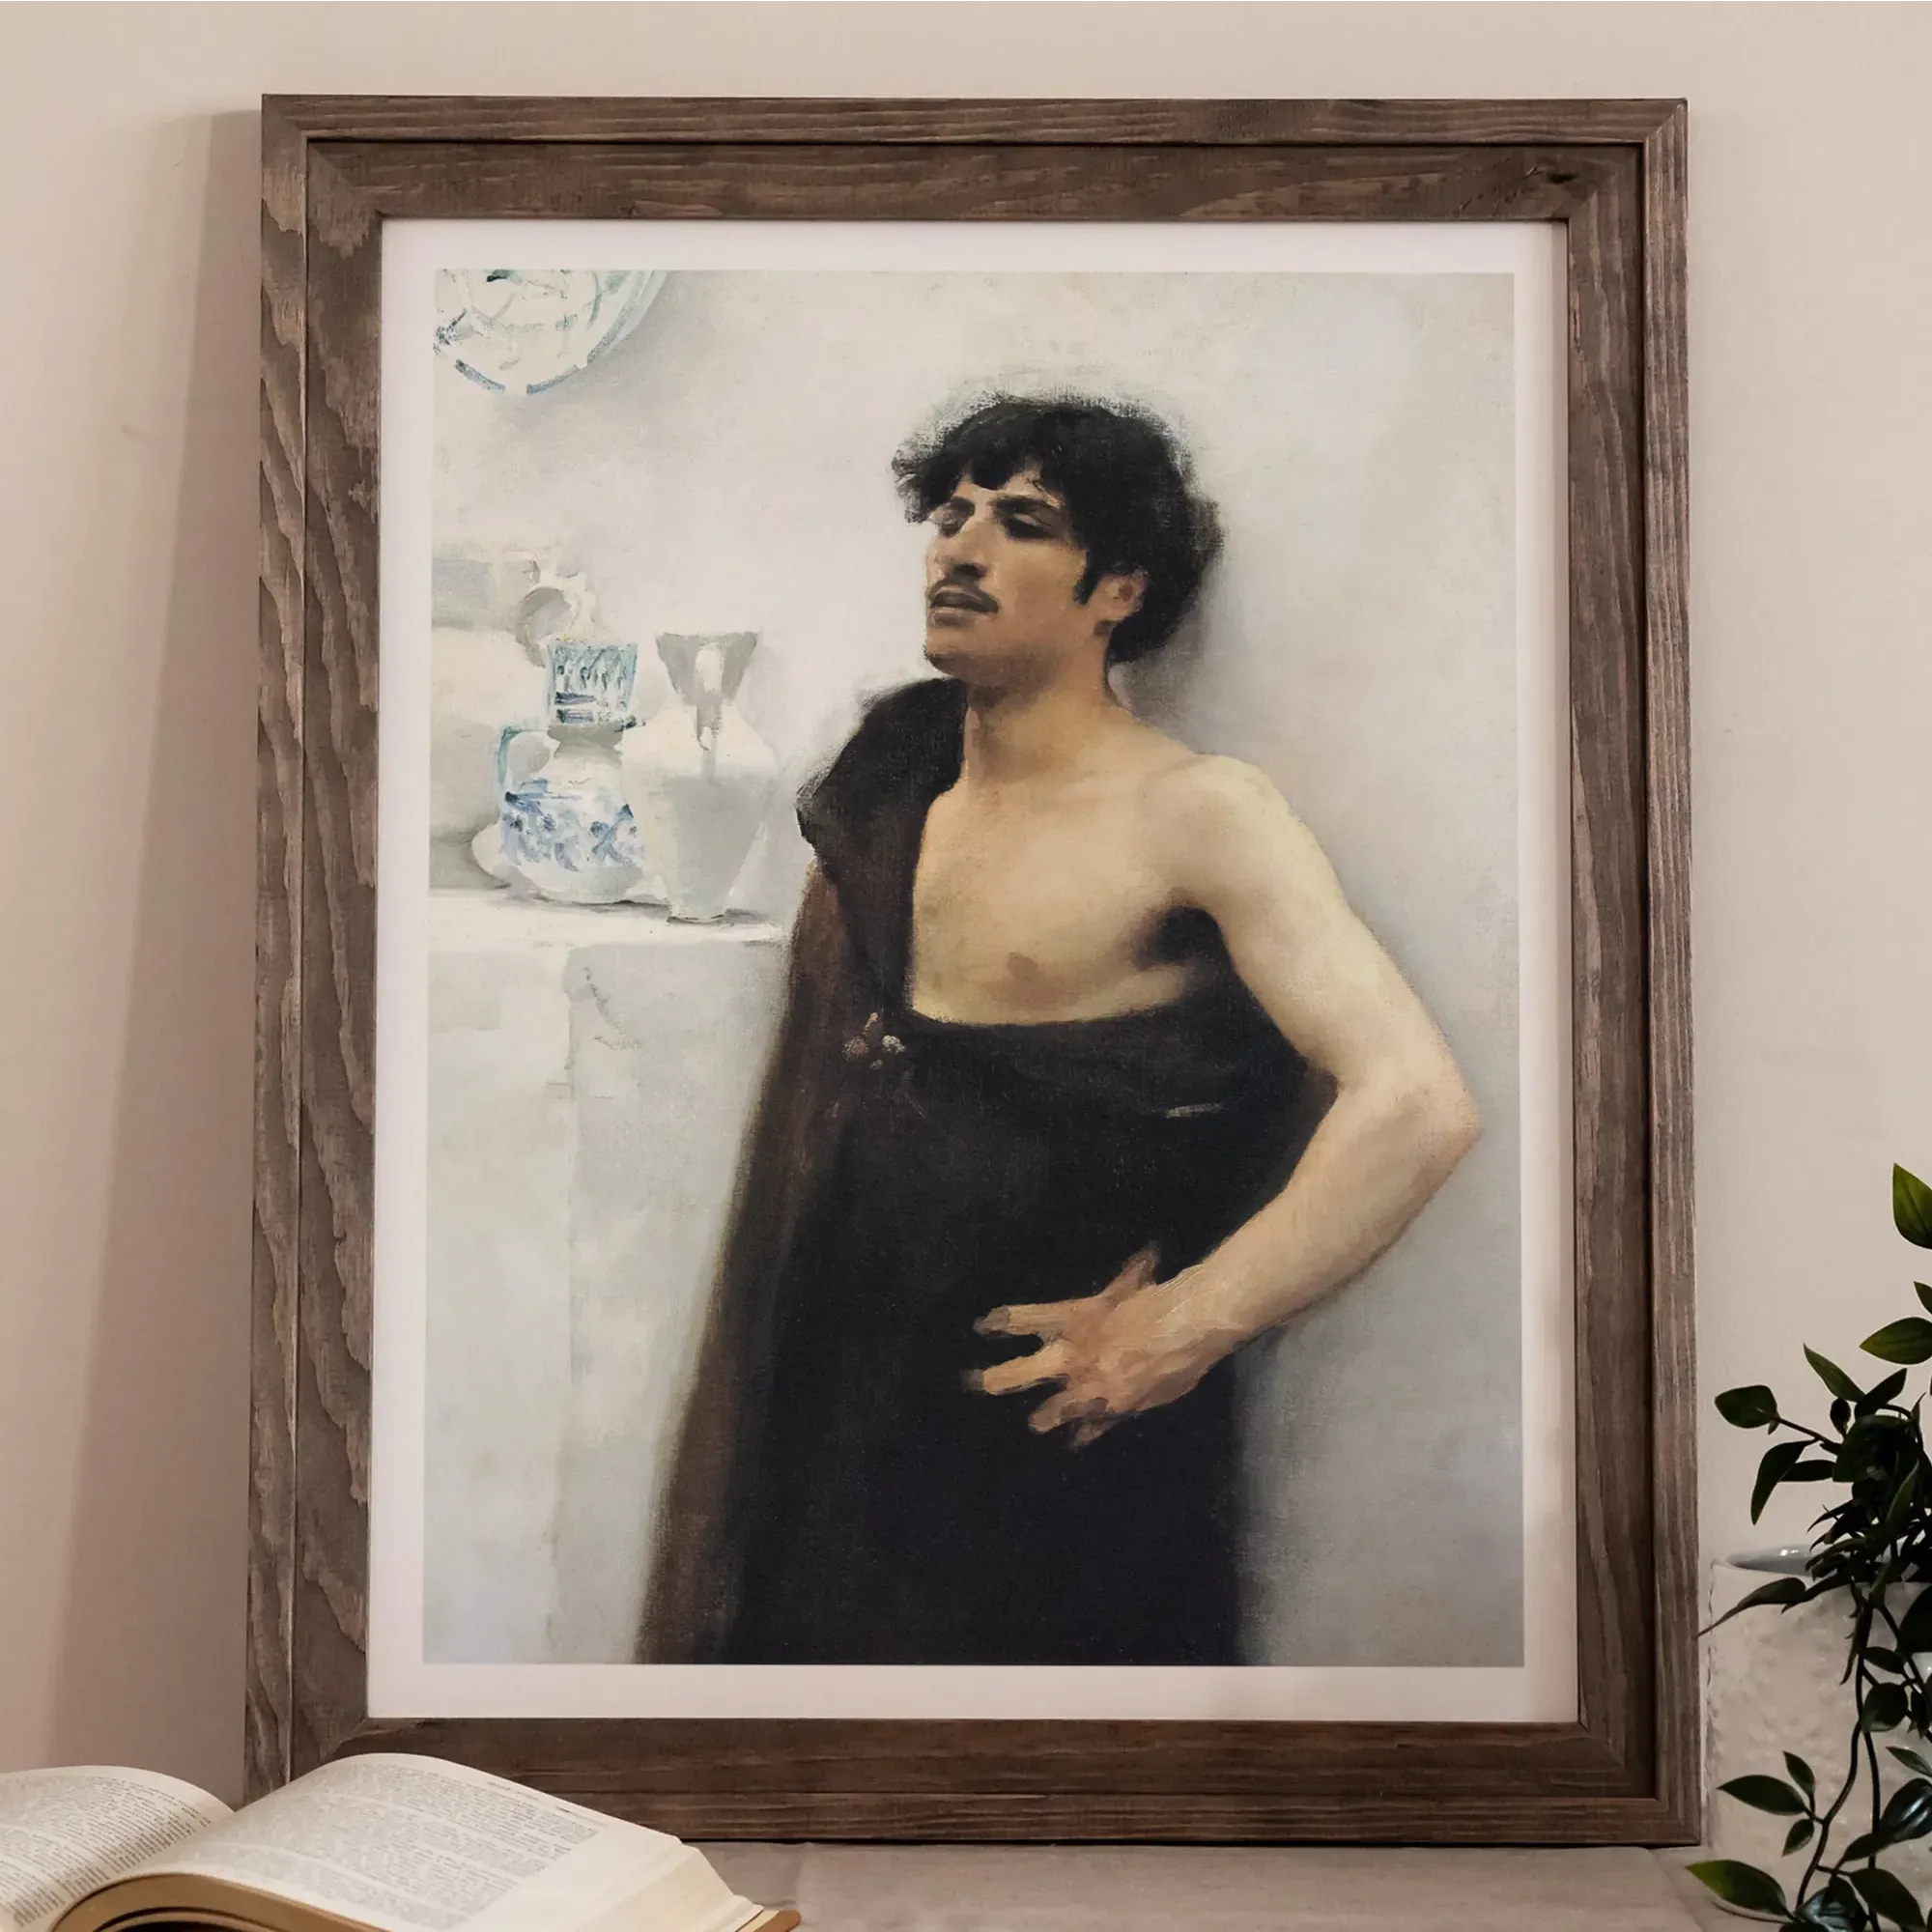 Young Man In Reverie By John Singer Sargent Fine Art Print - Posters Prints & Visual Artwork - Aesthetic Art